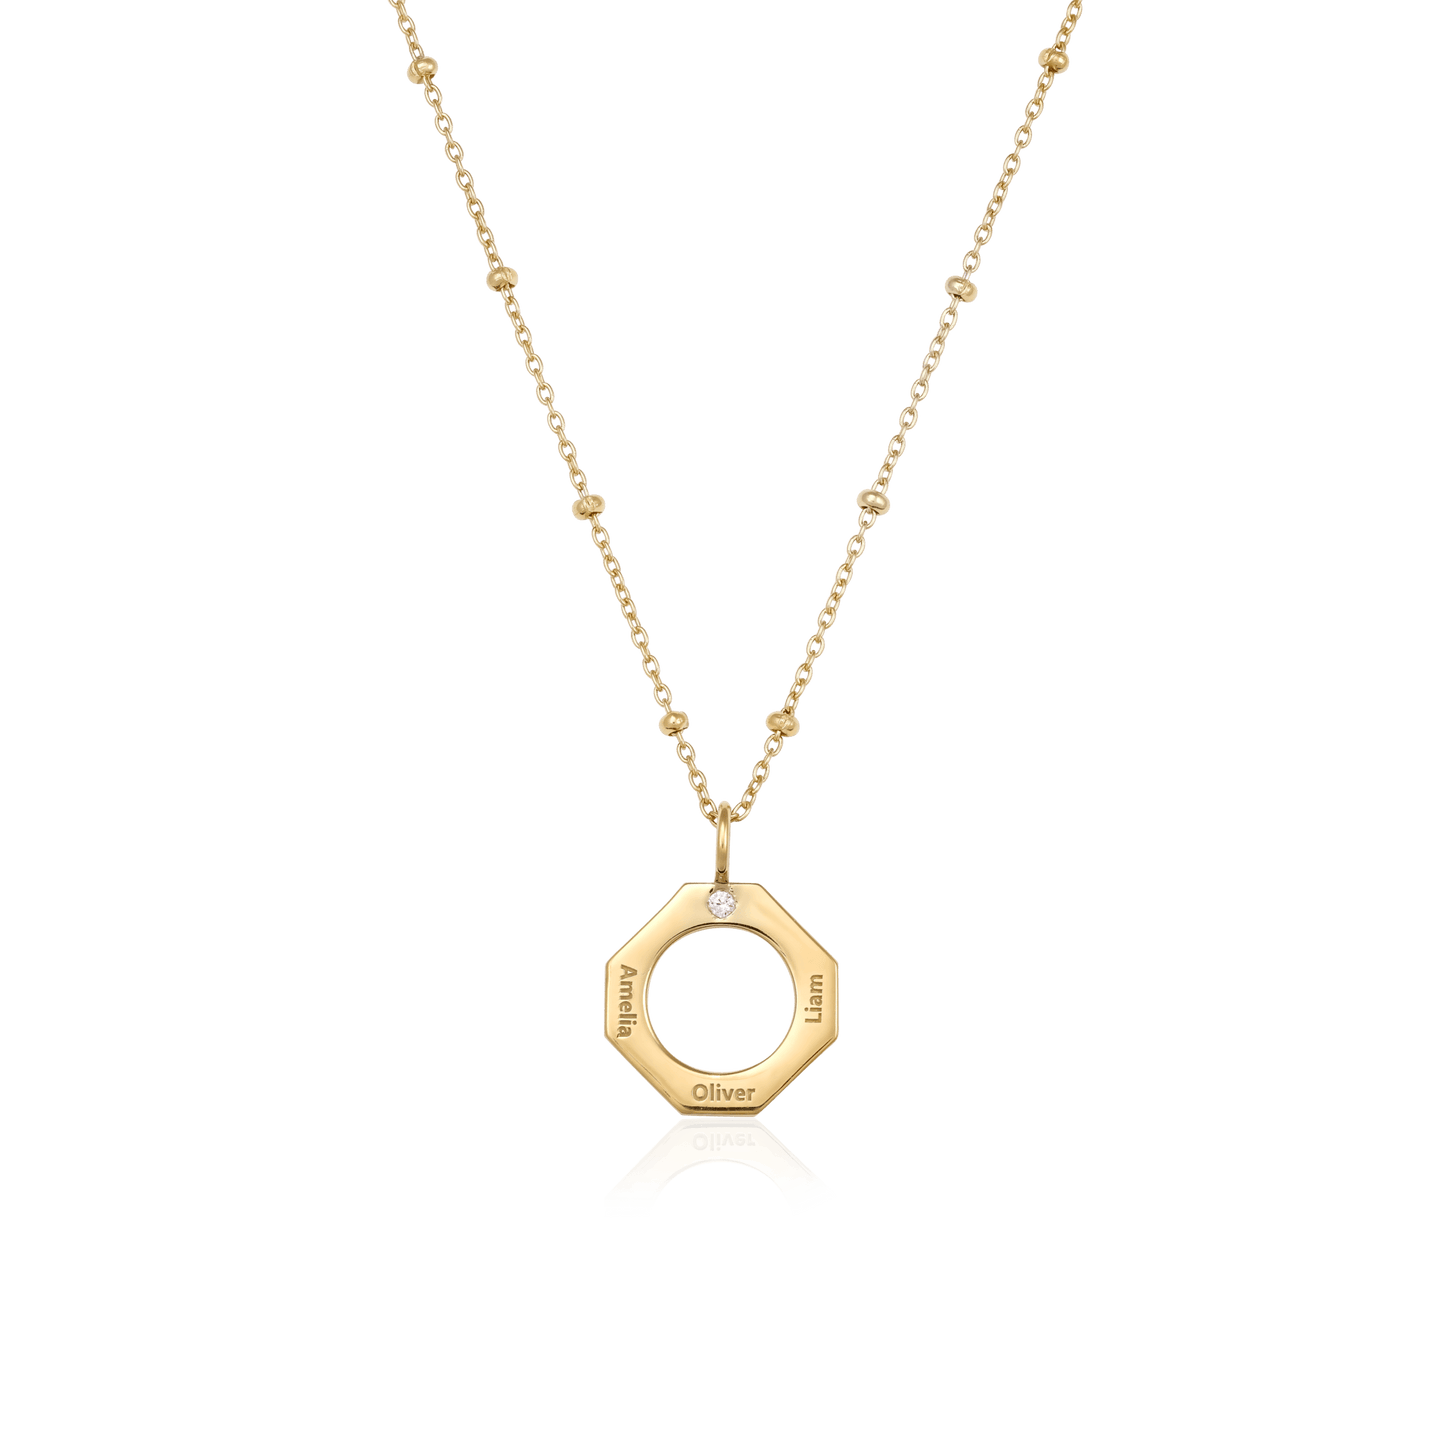 Geo Necklace - 18K Gold Vermeil Necklaces Gold Vermeil 1 Name Small - 16 Inches (40cm) 